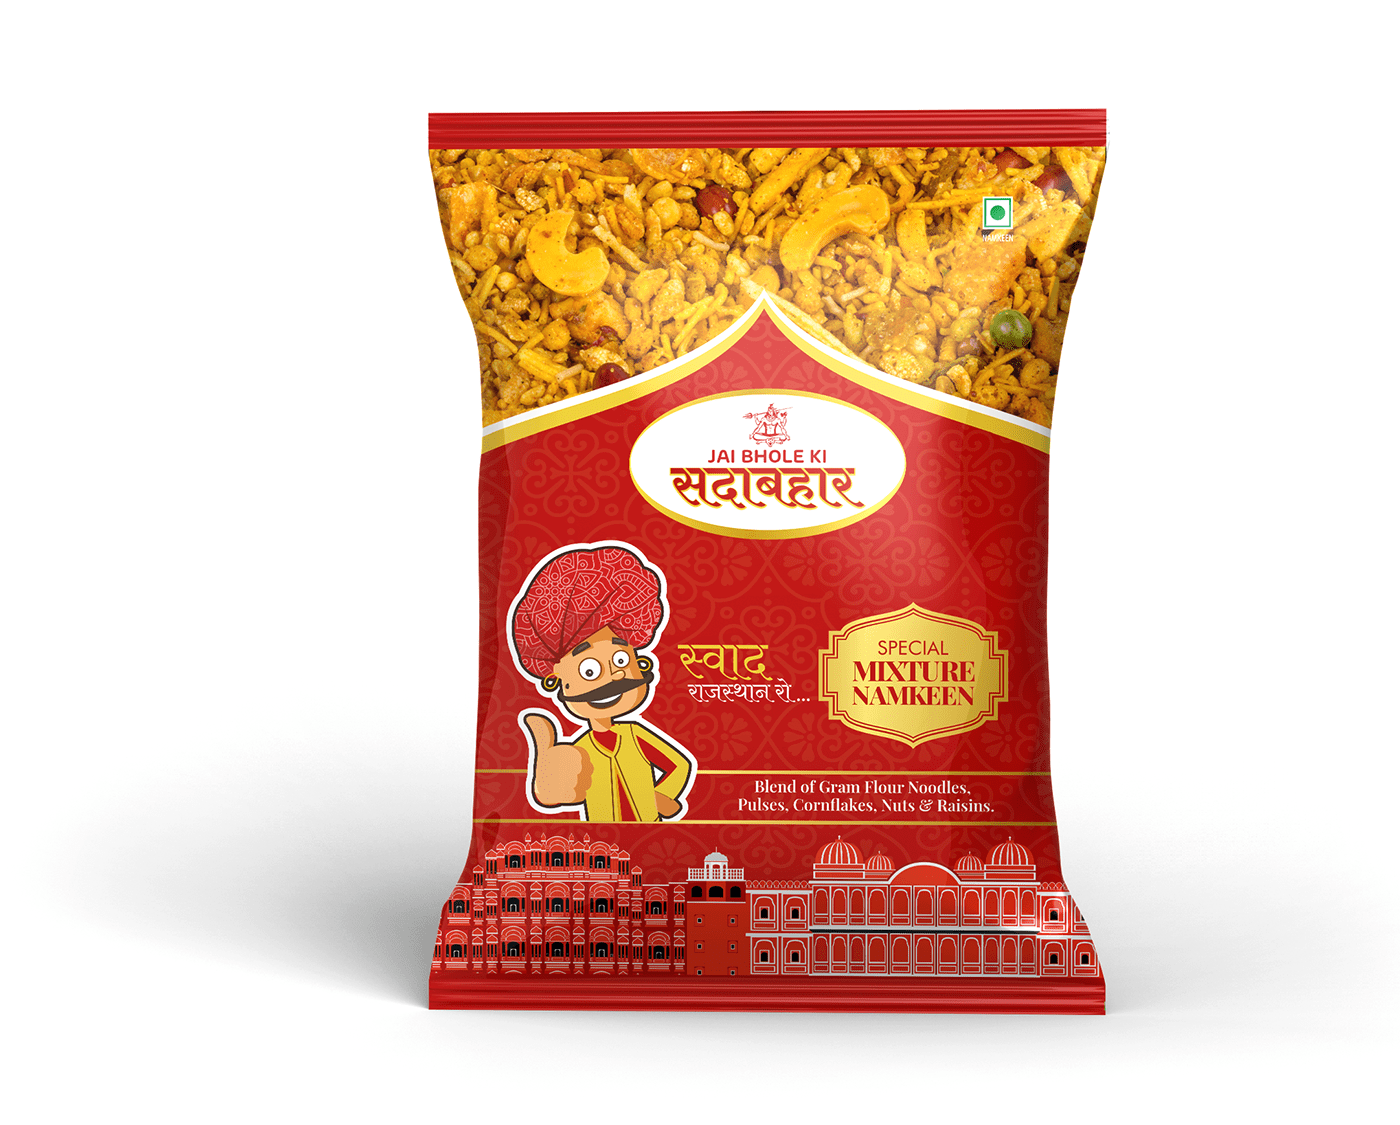 indian snacks packaging Mix Namkeen pouch Design Namkeen Packaging Namkeen Pouch Design Namkeen pouch Packaging Snack Box design snack label design snacks packaging Snacks Packaging Design Snacks Pouch Design